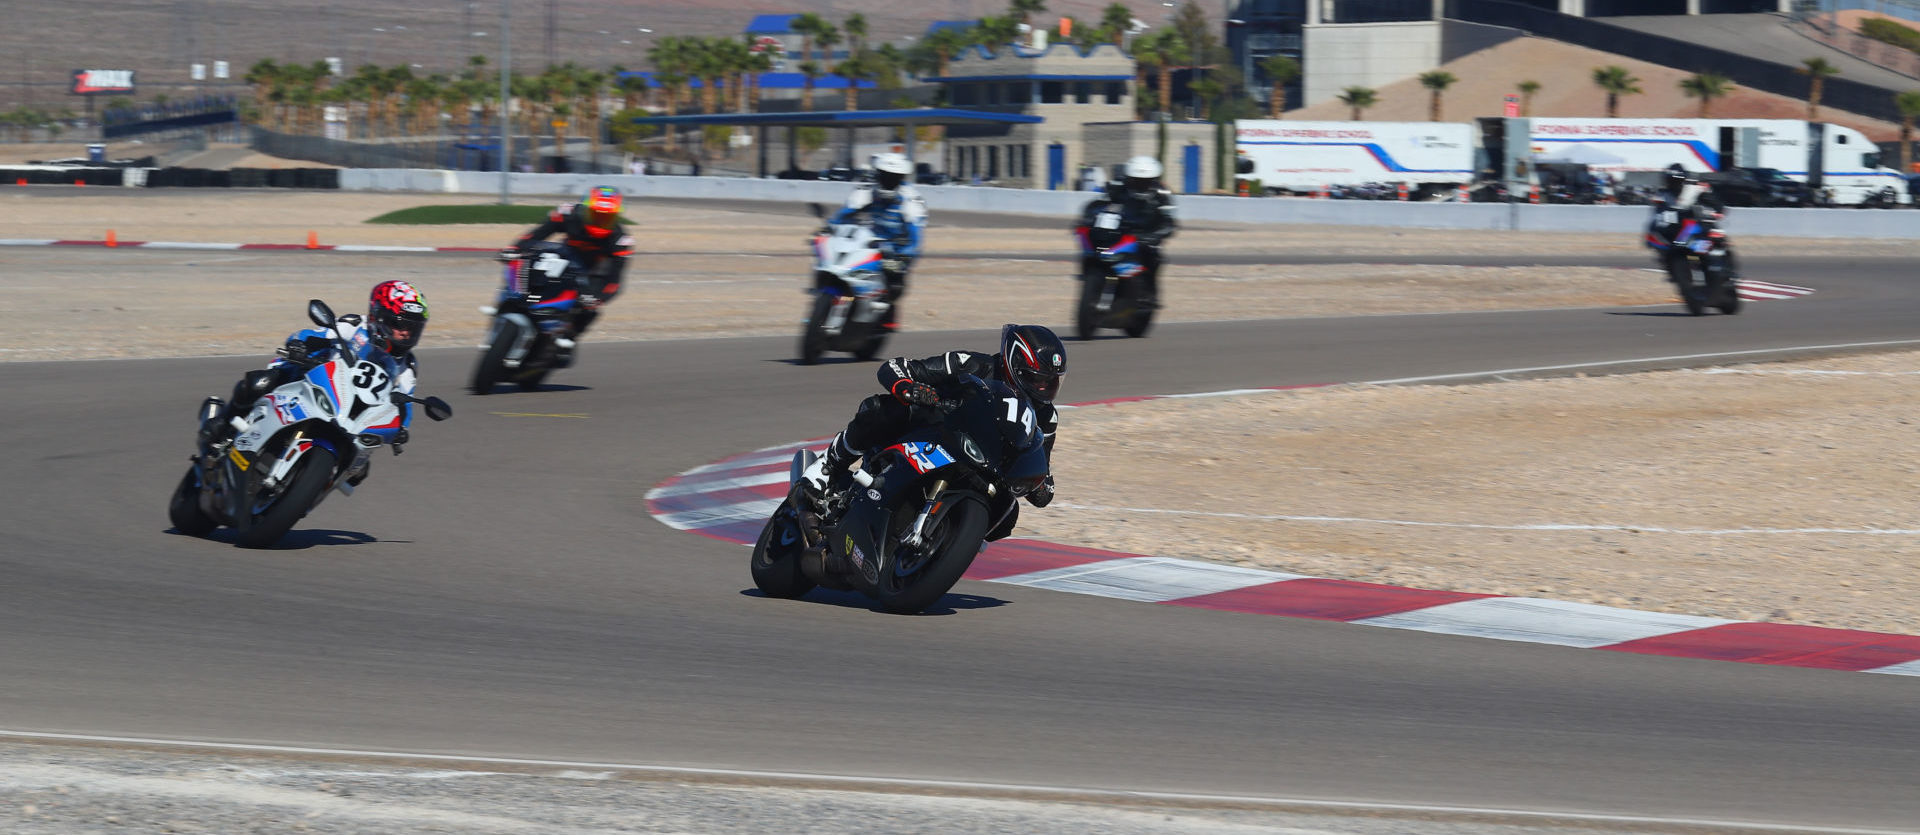 Las Vegas Motor Speedway is hosting the California Superbike School (pictured) and Yamaha Champions Riding School in February. Photo by etechphoto.com, courtesy California Superbike School.